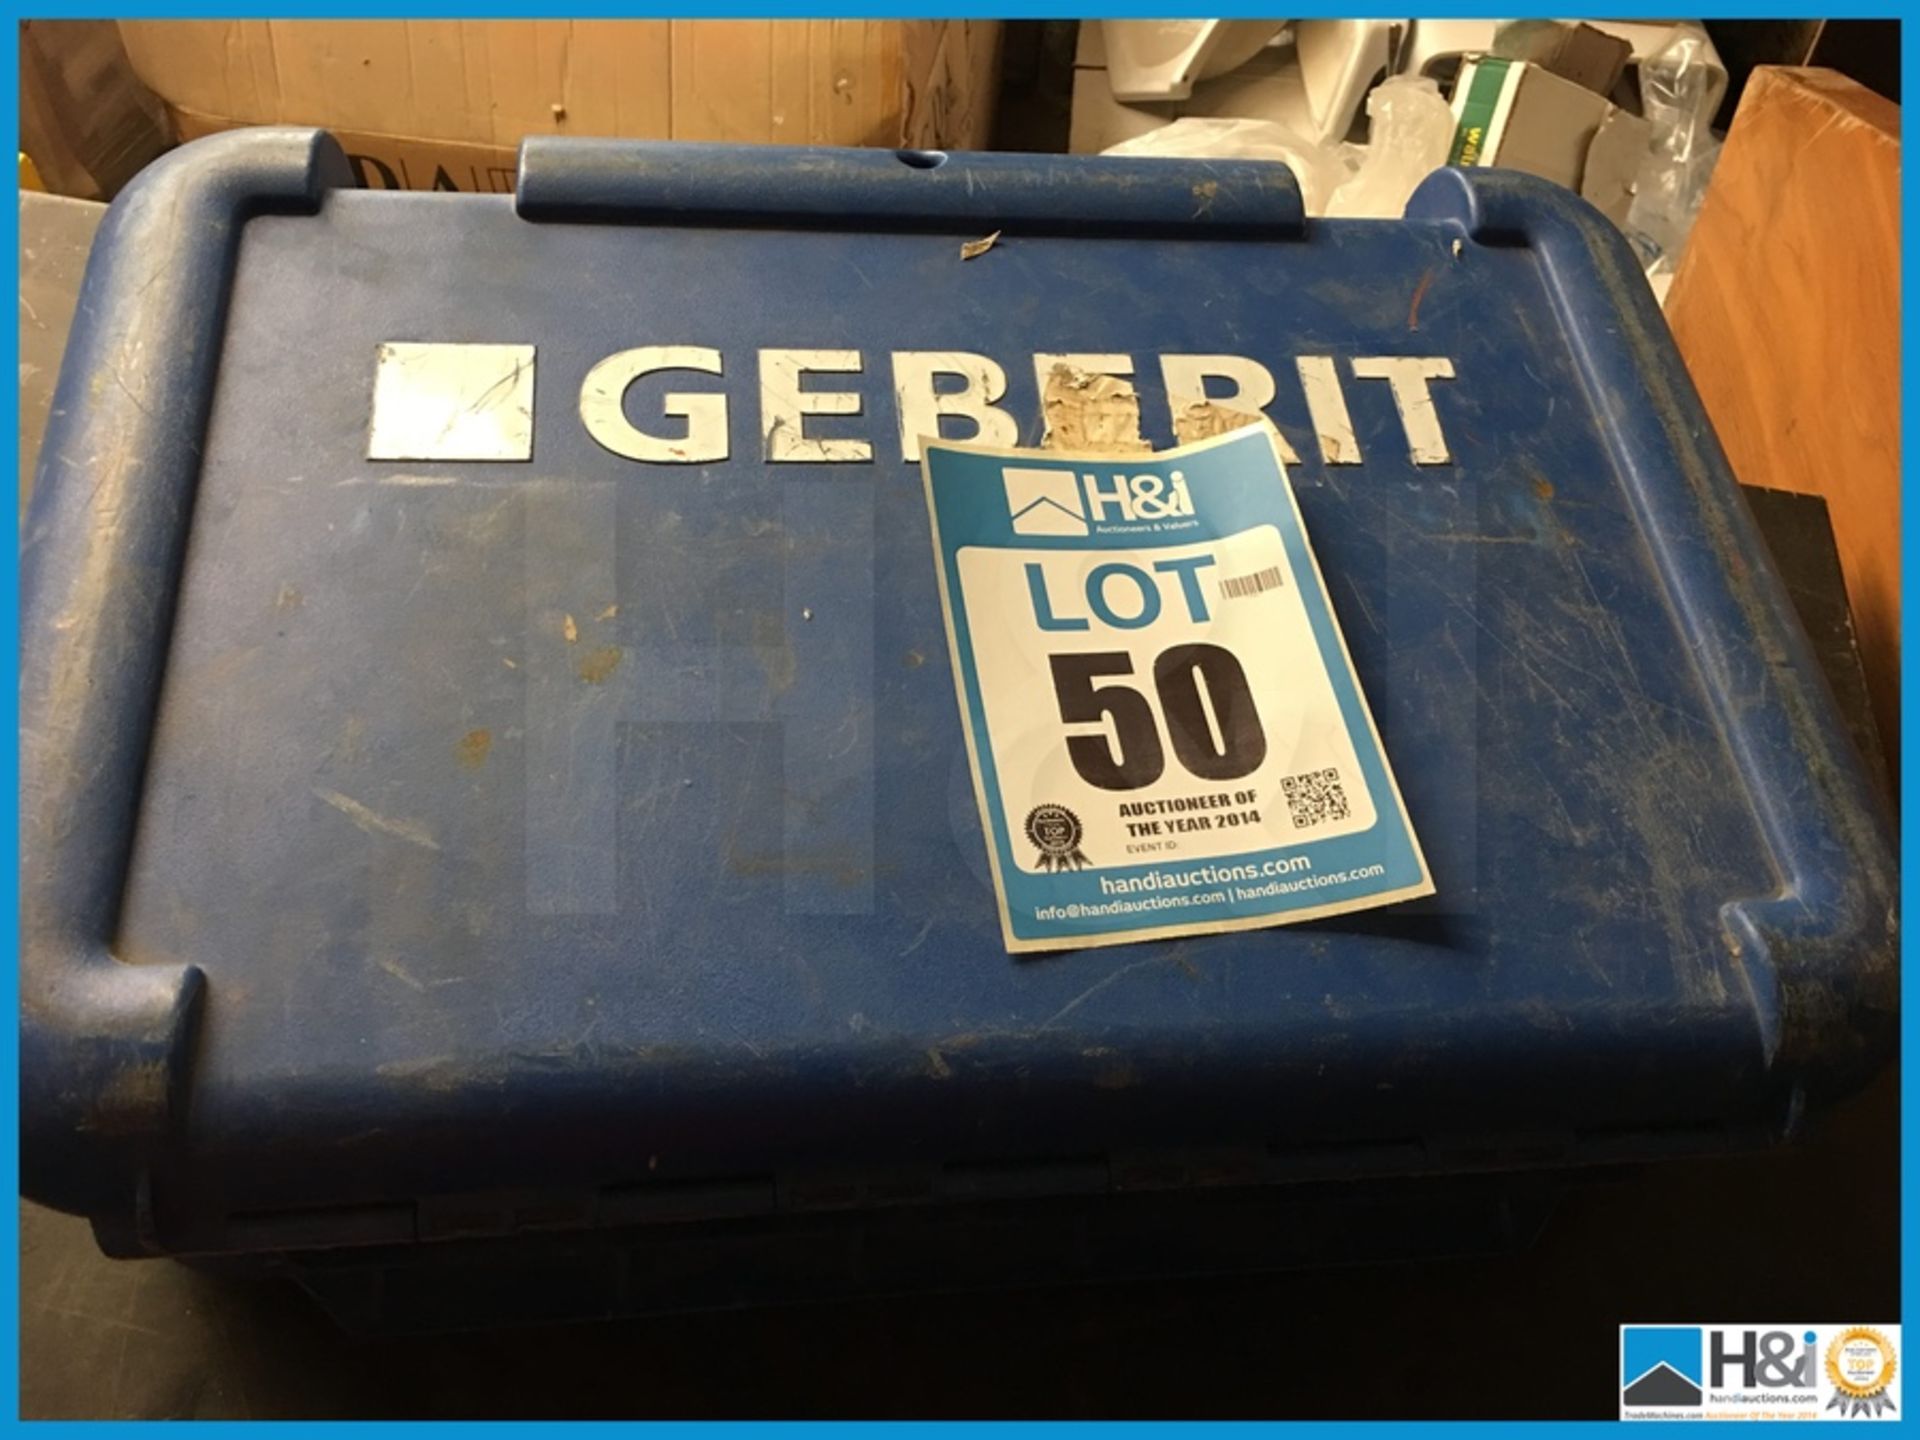 Geberit hydraulic crimper Mapress 76.1 - 89.9. Boxed. Appears to be in good condition Appraisal: